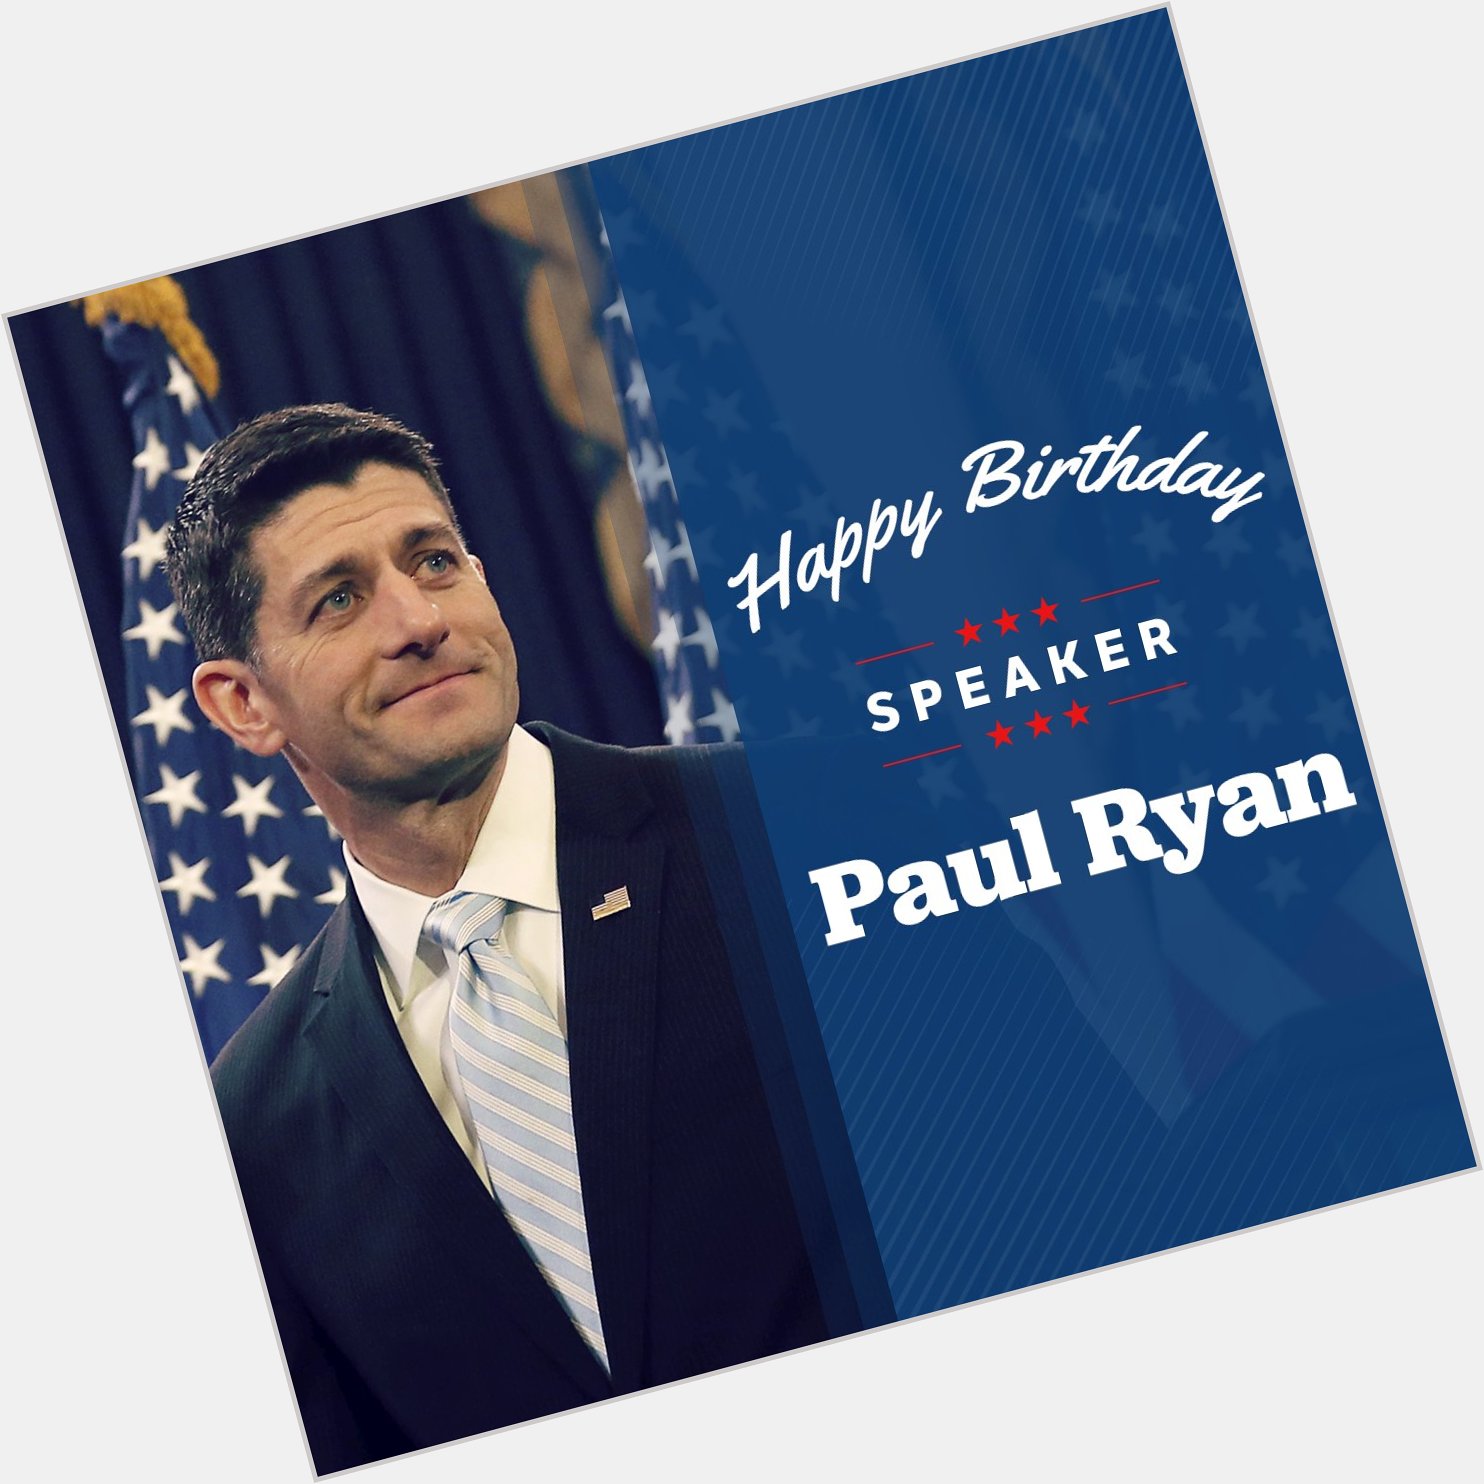 Absolutely!  Happy Bday to the handsome Paul Ryan.    to wish a happy birthday!   